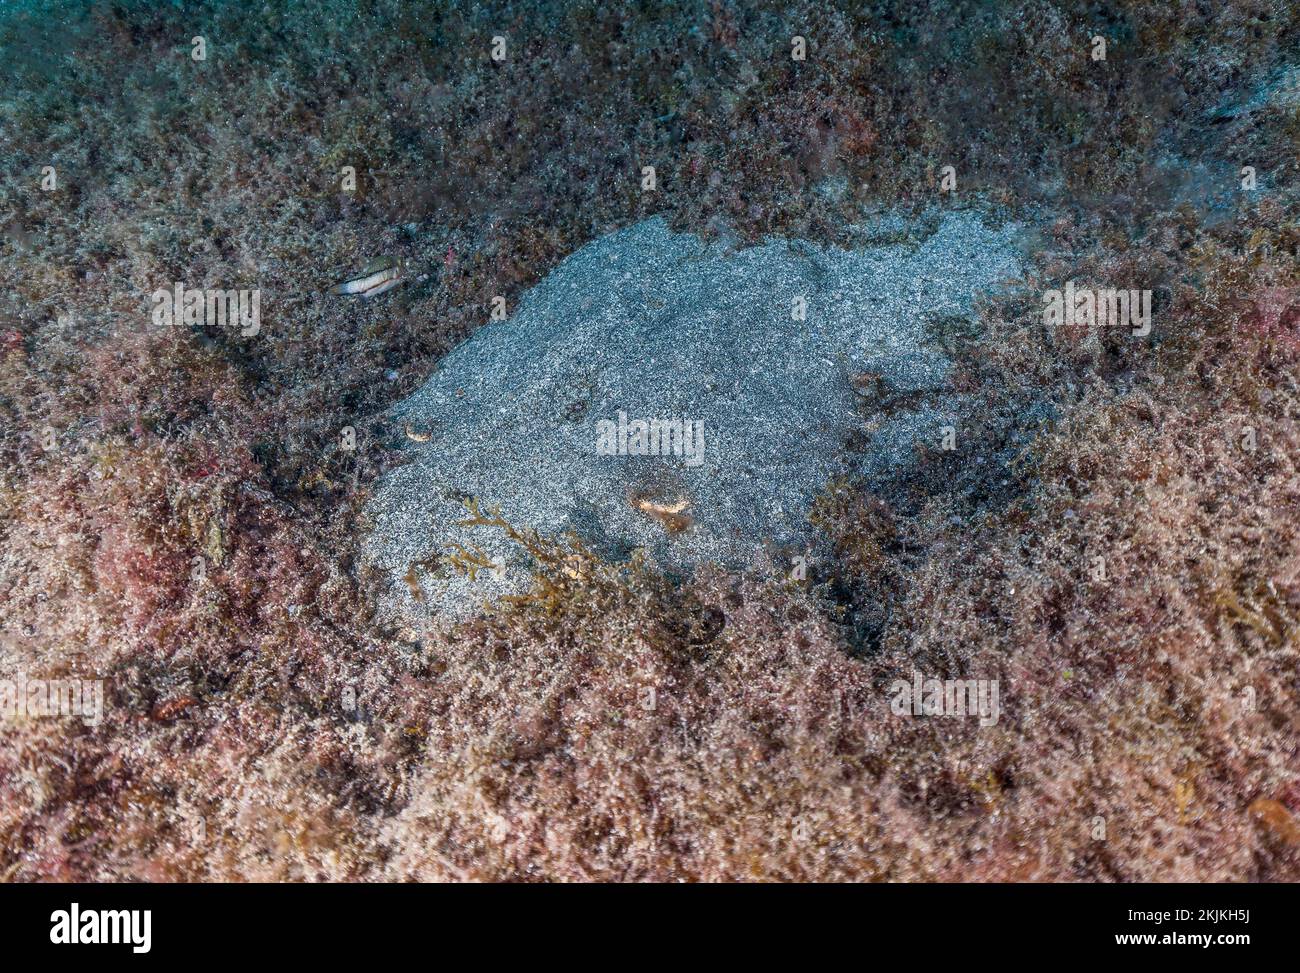 Monkfish (Squatina squatina) buried in the sand, Lanzarote, Canary Islands, Spain, Europe Stock Photo